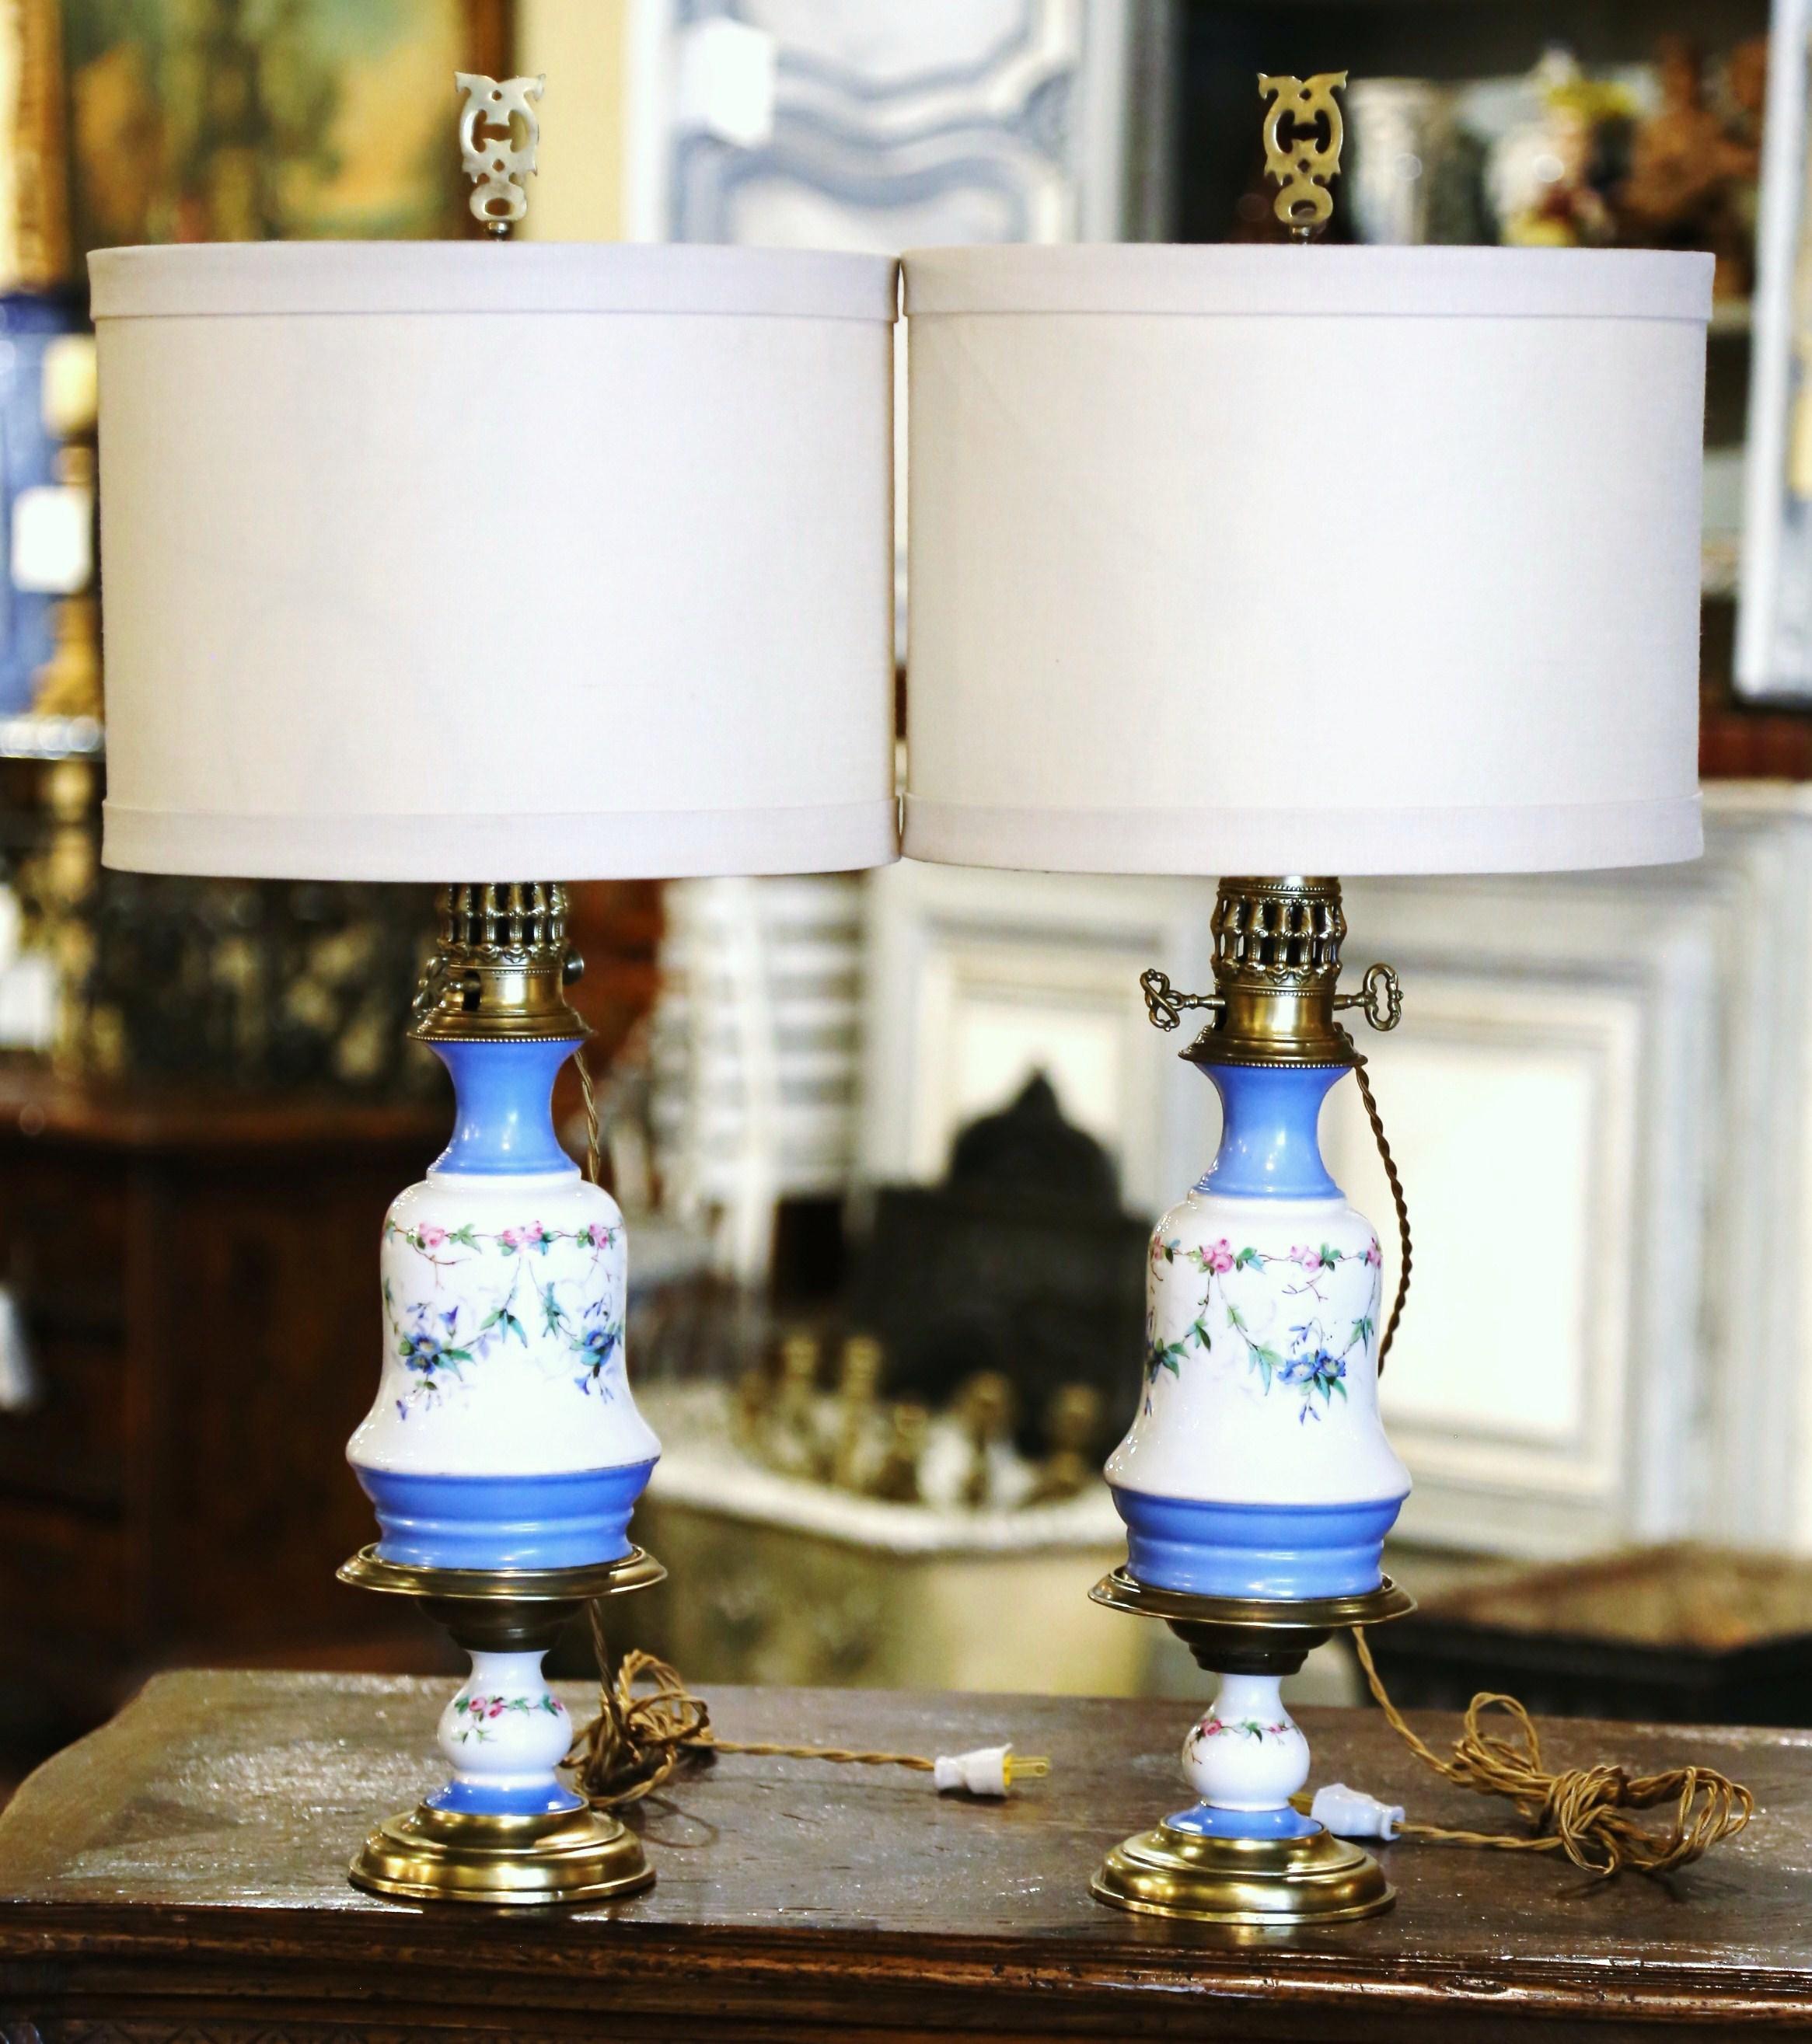 Hand-Painted Pair of 19th Century French Porcelain & Brass Table Oil Lamps with Floral Motif For Sale